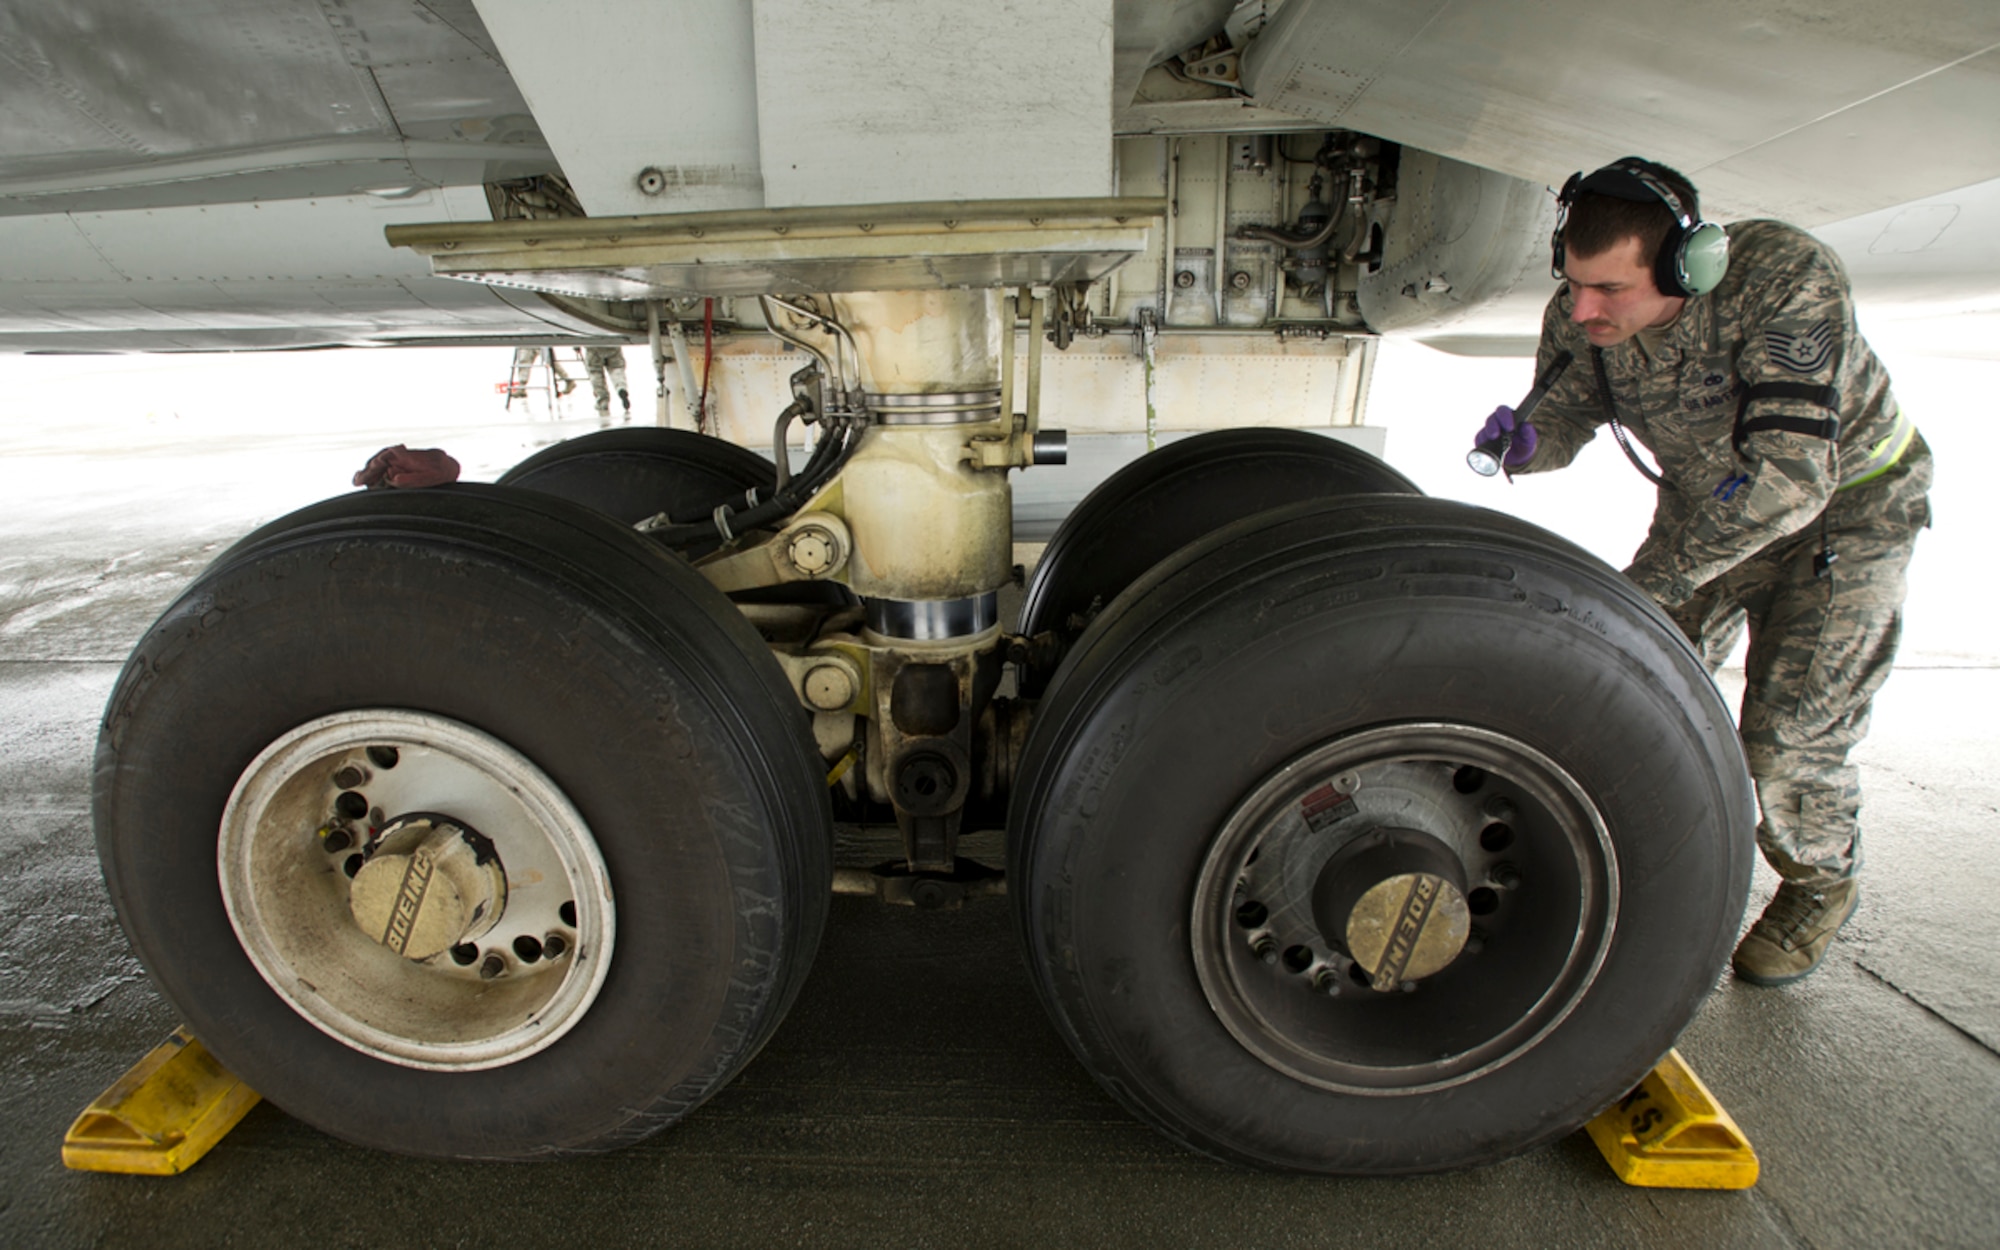 Tech Sgt. Chad McBunch, assigned to the 962nd Aircraft Maintenance Unit, inspects the landing gear on a E-3 Sentry Airborne Warning and Control
System aircraft after a mission on Joint Base Elmendorf-Richardson, Alaska, Wednesday, March 17, 2014. (U.S. Air Force photo by Justin Connaher/Released)